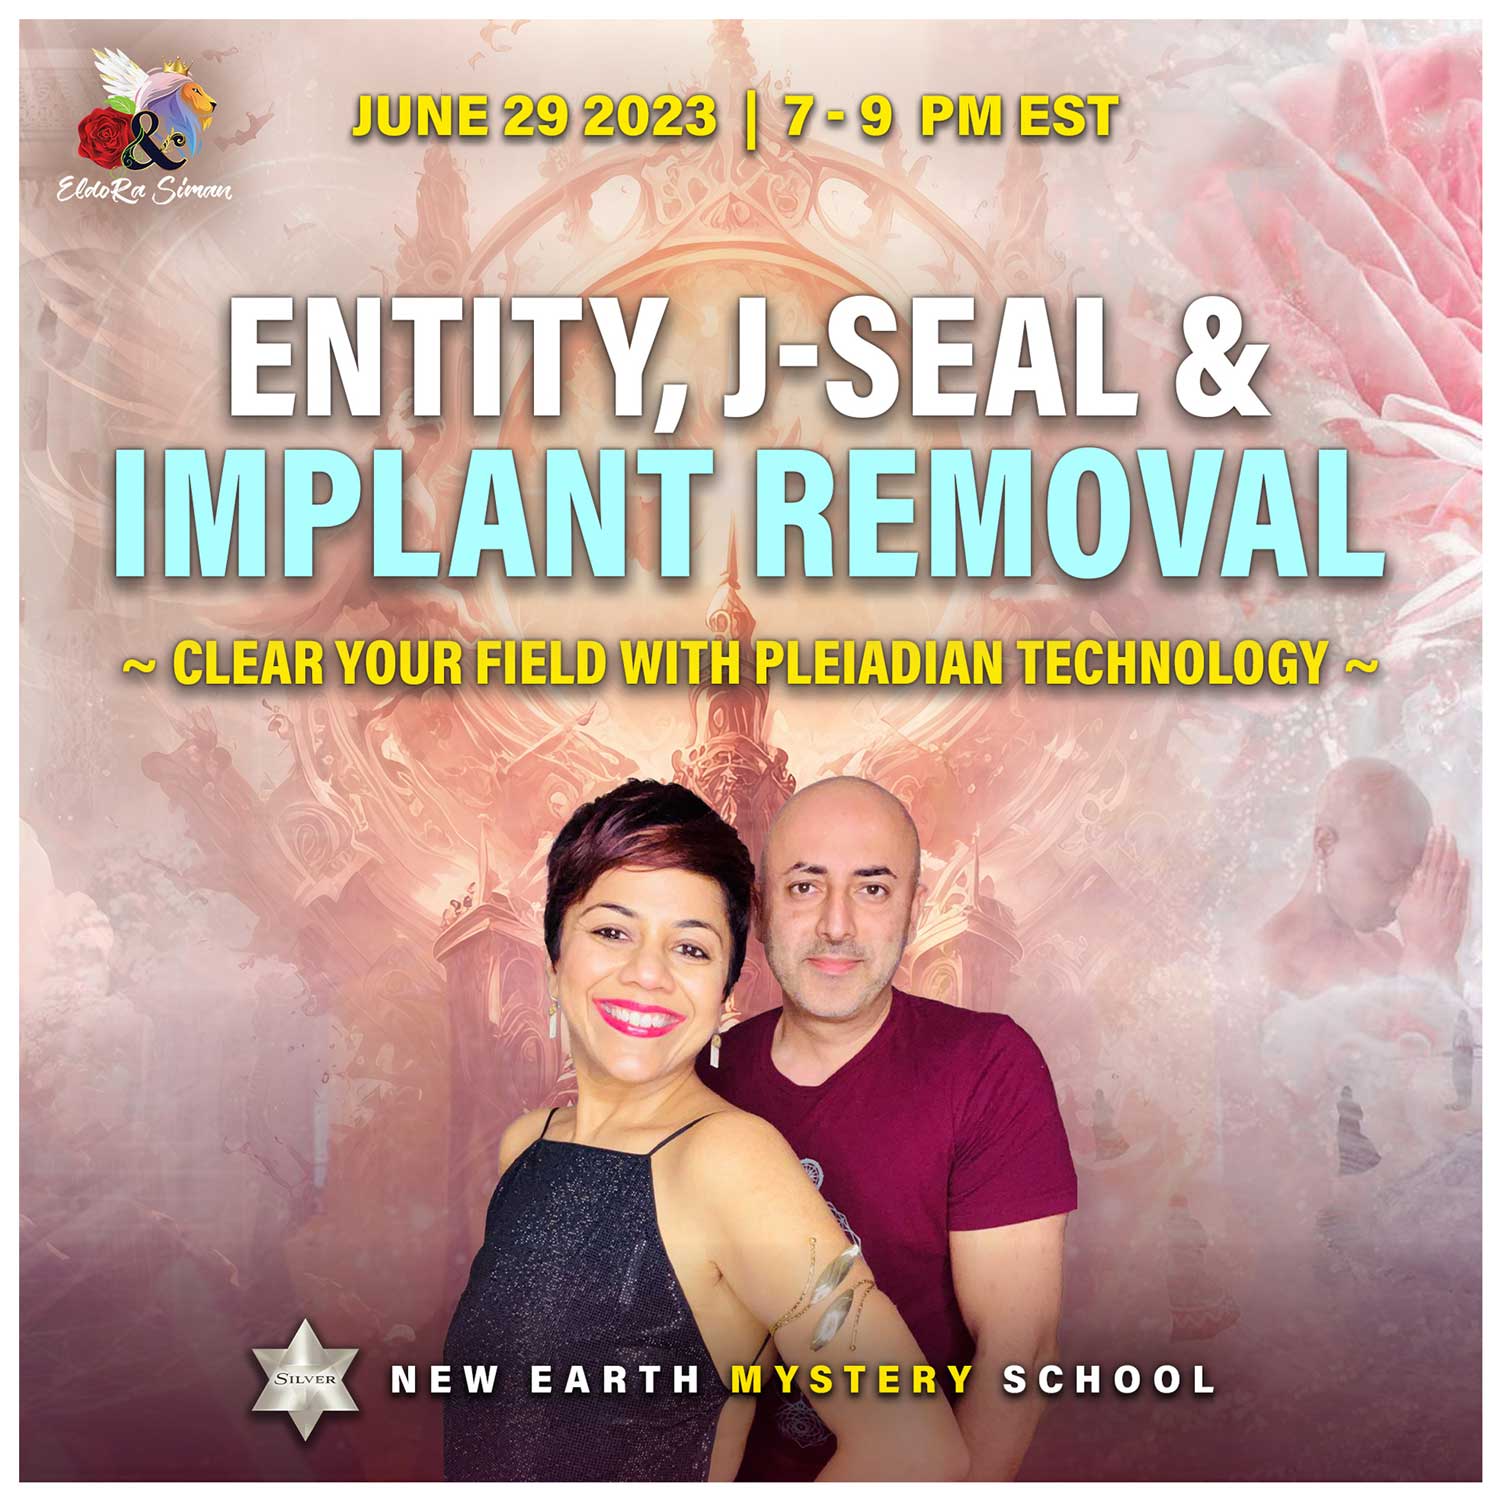 J-SEAL, IMPLANT, AND ENTITY REMOVAL